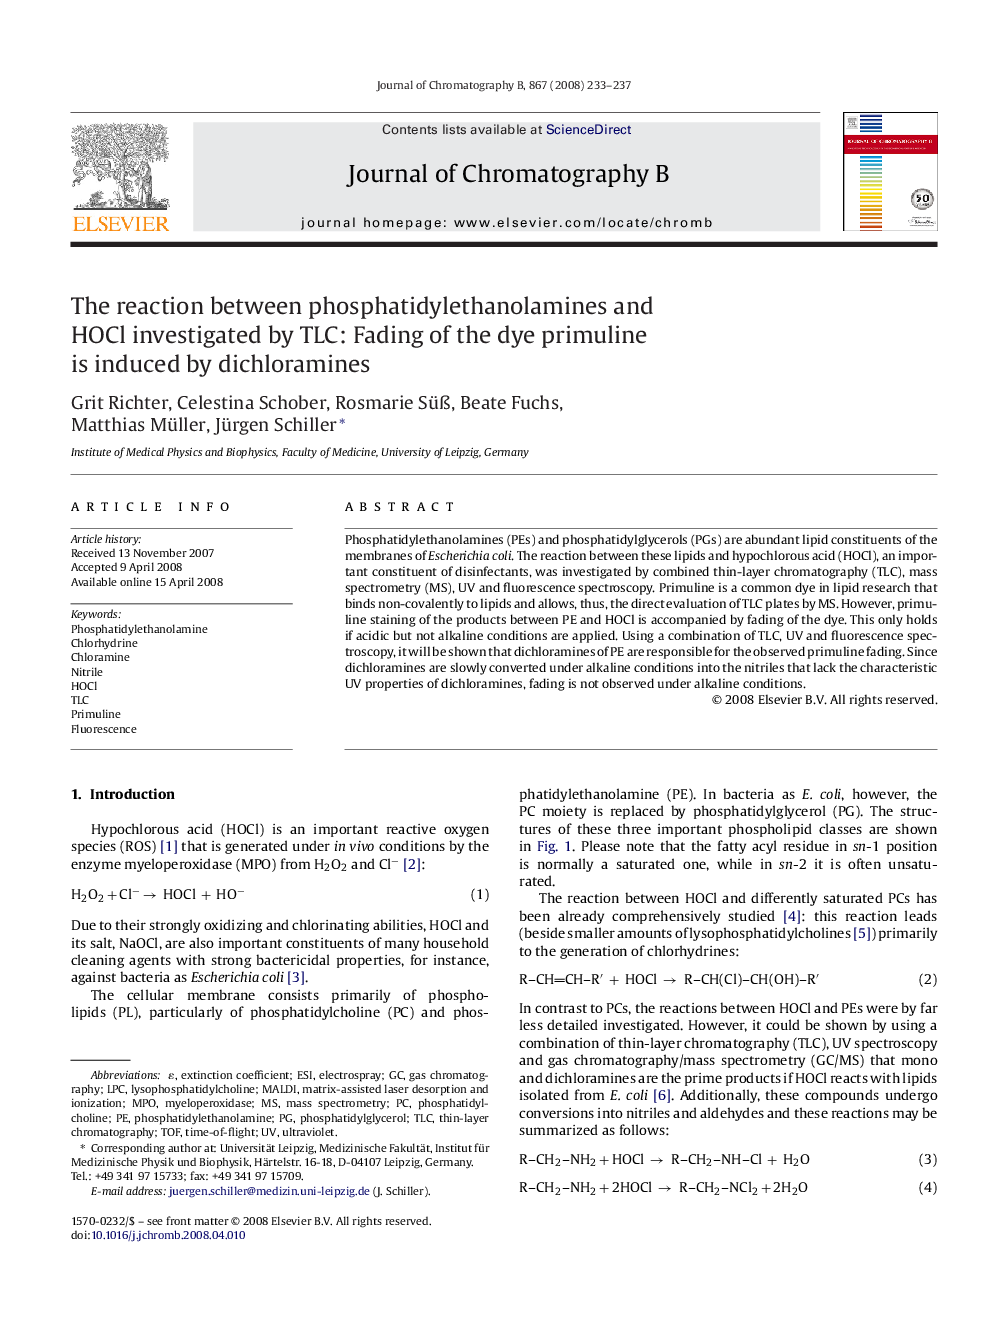 The reaction between phosphatidylethanolamines and HOCl investigated by TLC: Fading of the dye primuline is induced by dichloramines